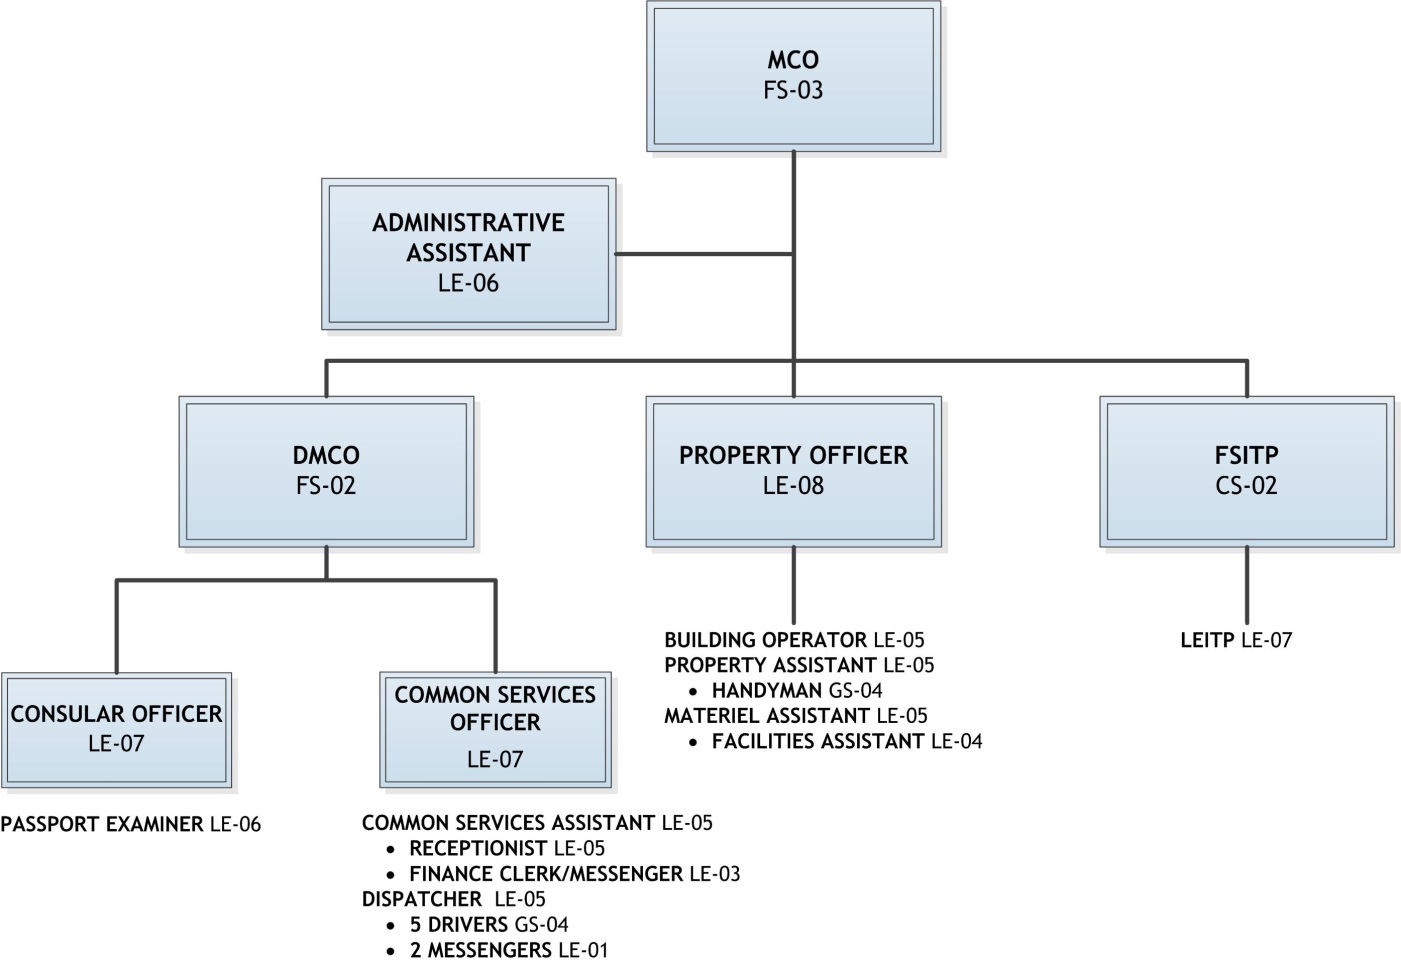 Appendix A: Organizational  chart for the management  and consular services program